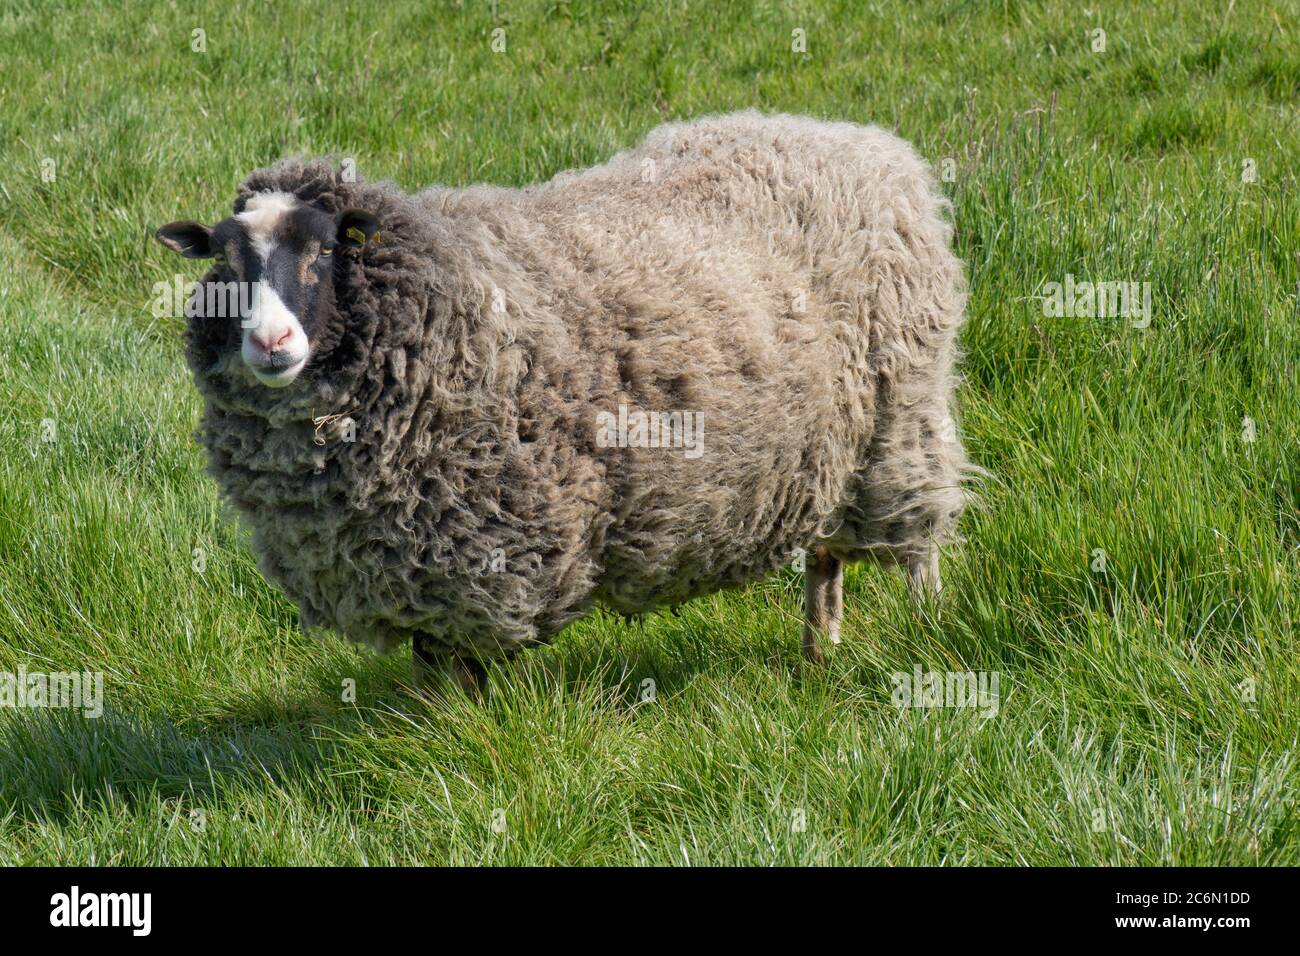 A Shetland sheep wether (neutered male) with full fleece on grass in spring before shearing, Berkshire, May Stock Photo